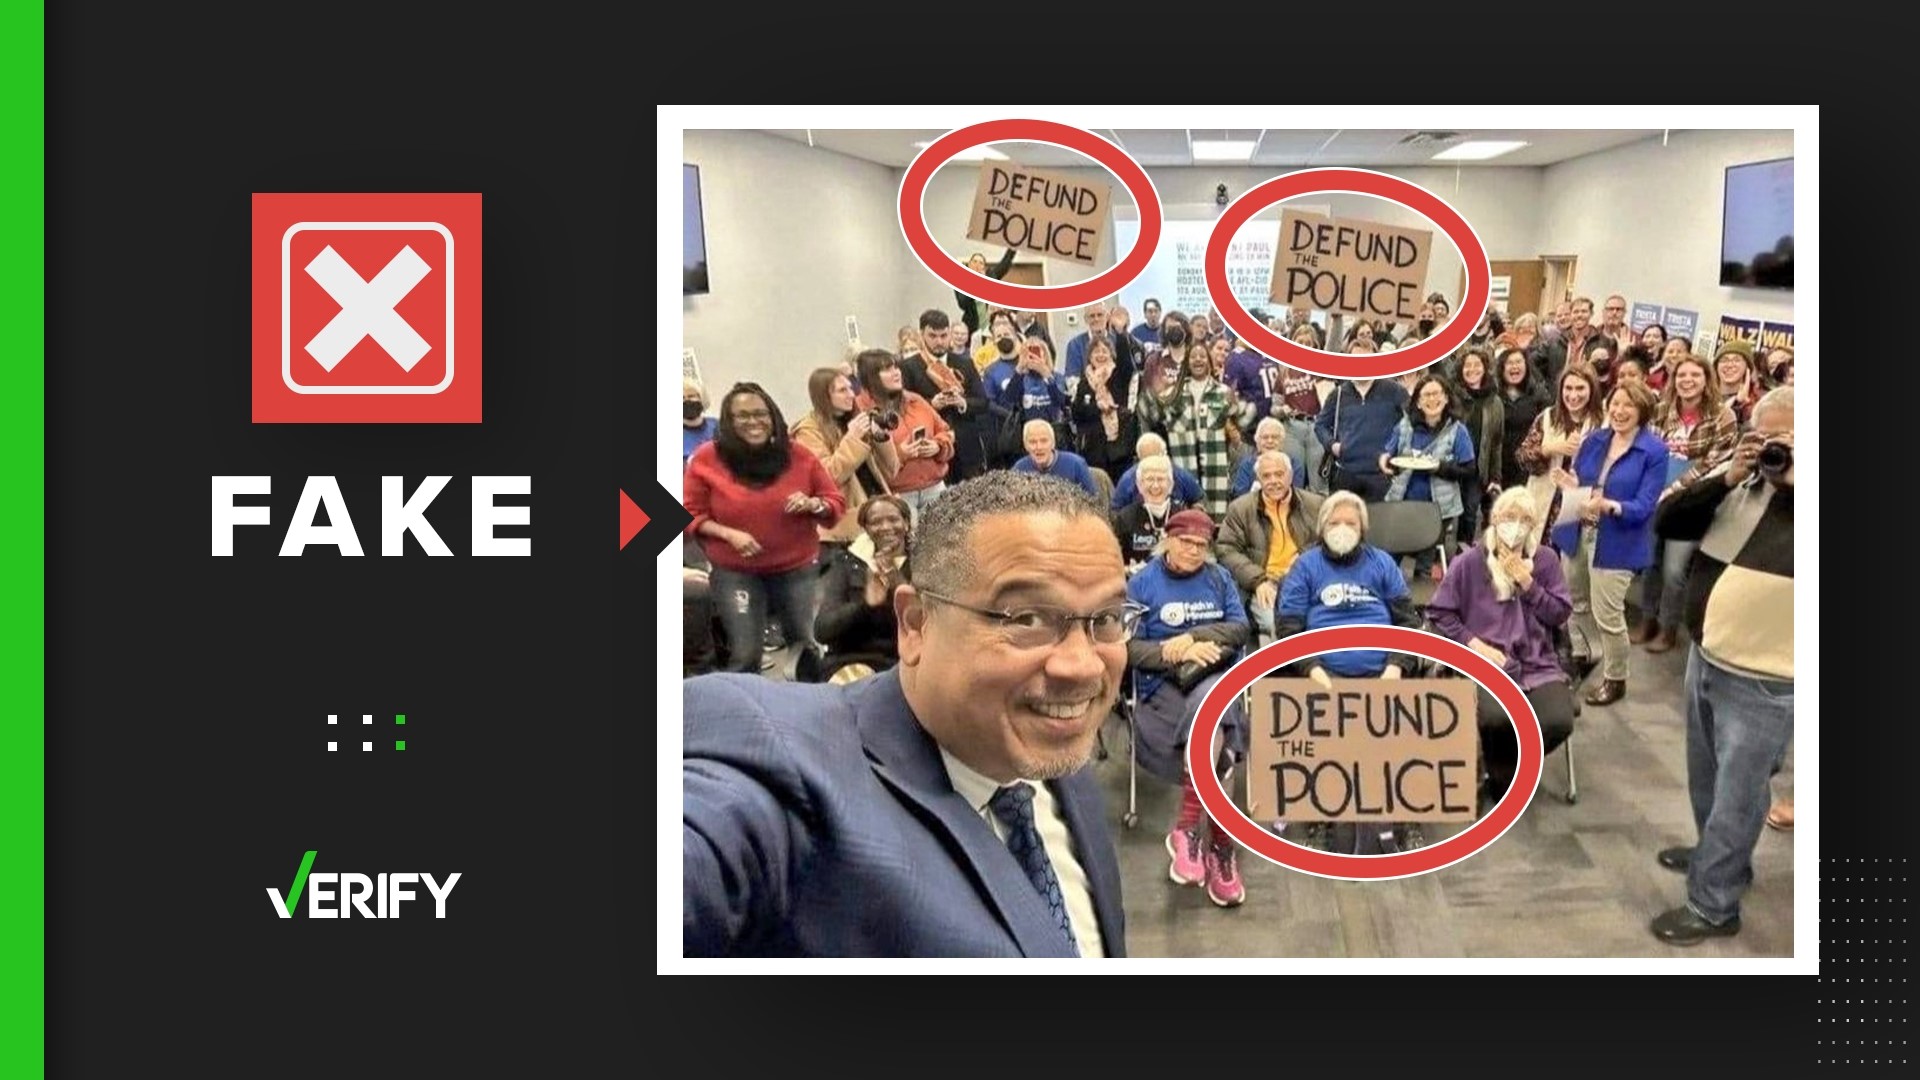 The Amy Klobuchar photo is photoshopped. The Minnesota congresswoman attended a Democratic campaign program, not a “defund the police” event.